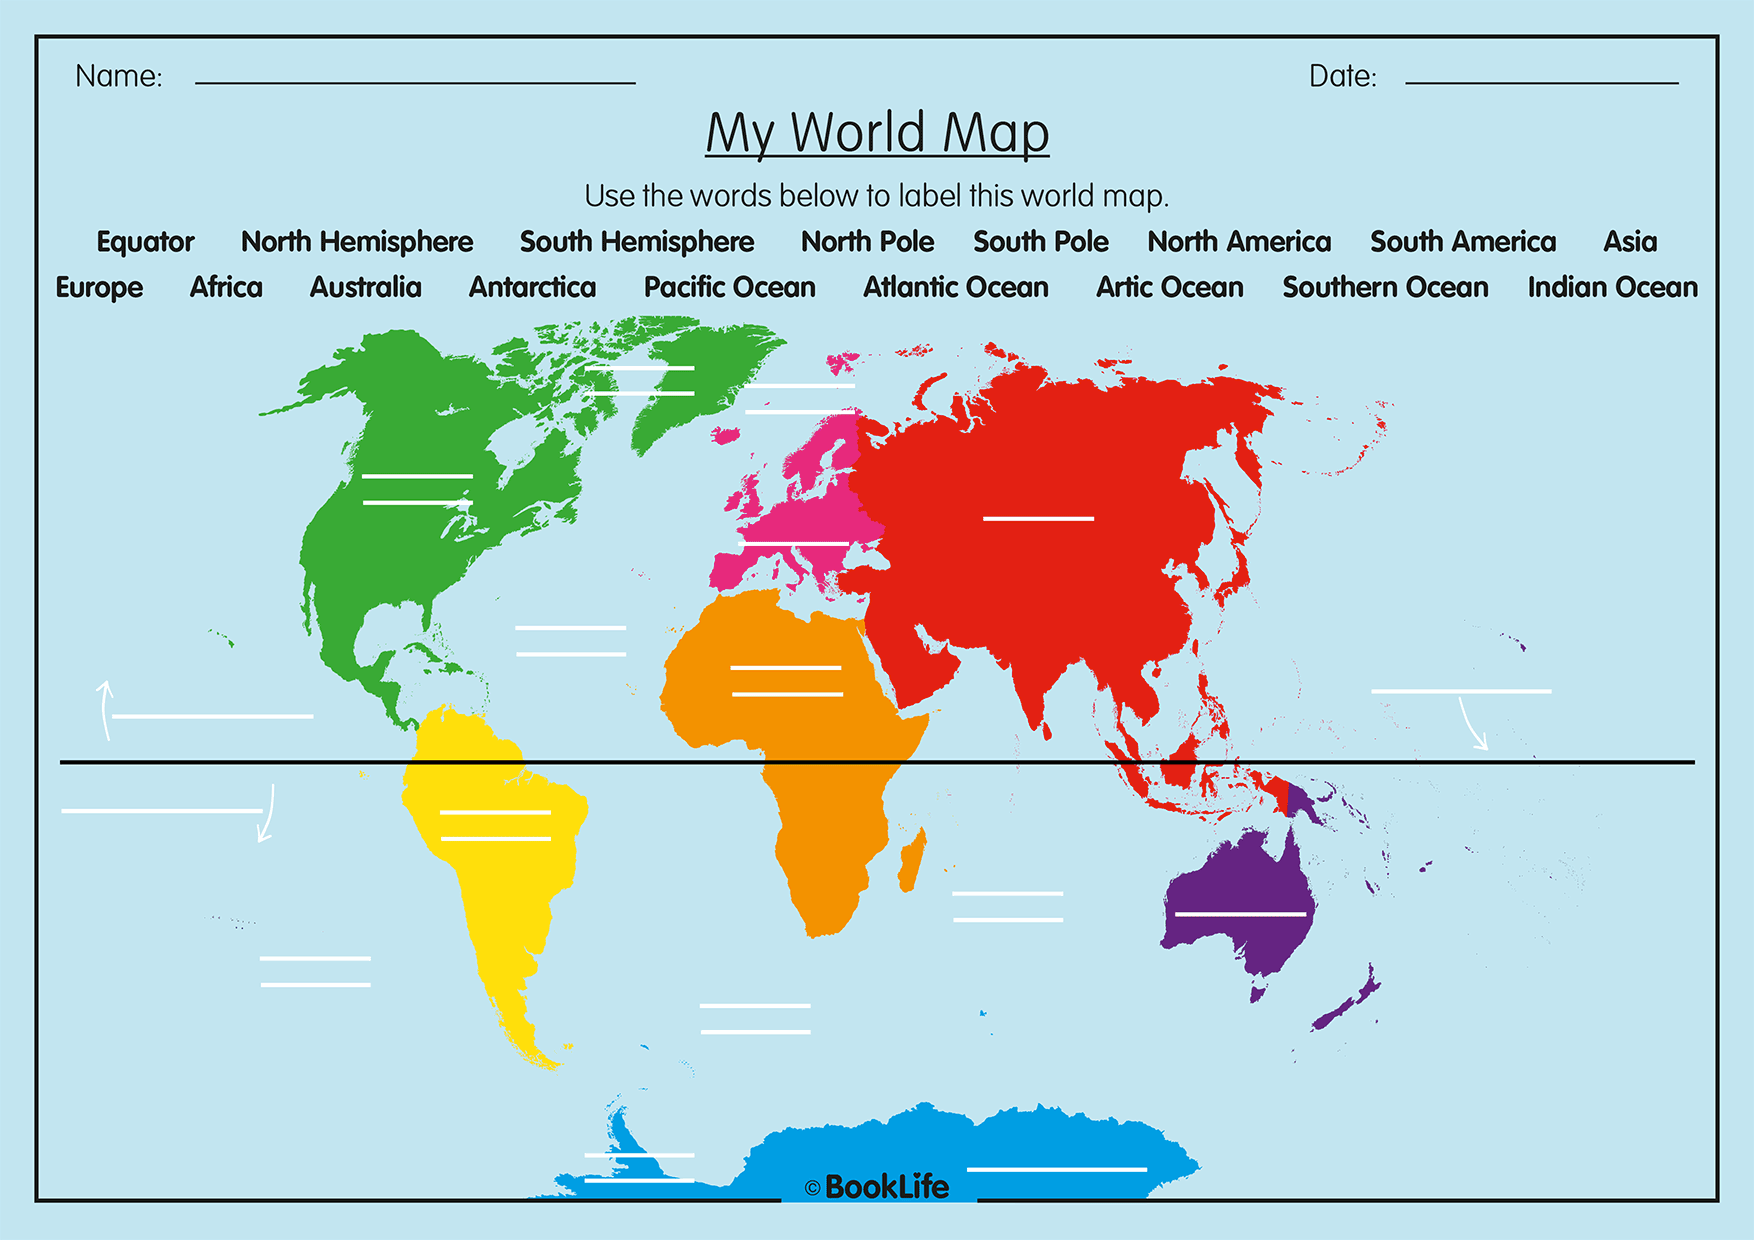 My World Map by BookLife